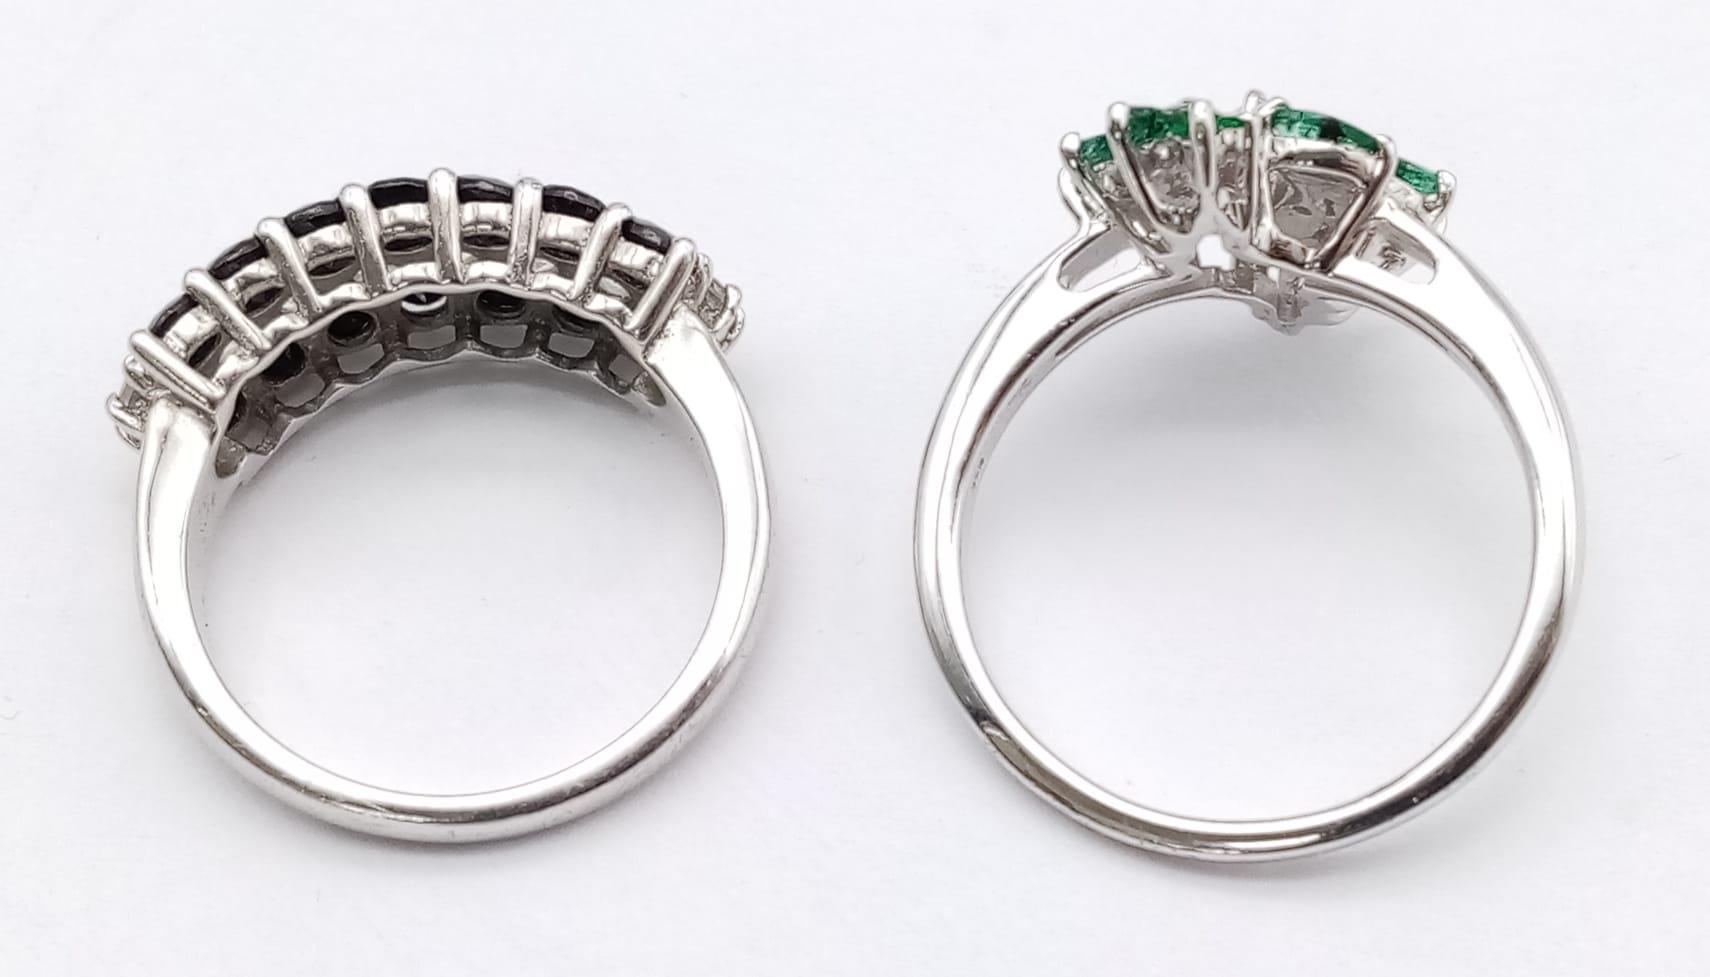 Two 925 Sterling Silver Gemstone Rings: Sapphire - Size P and Emerald - Size -R. - Image 5 of 6